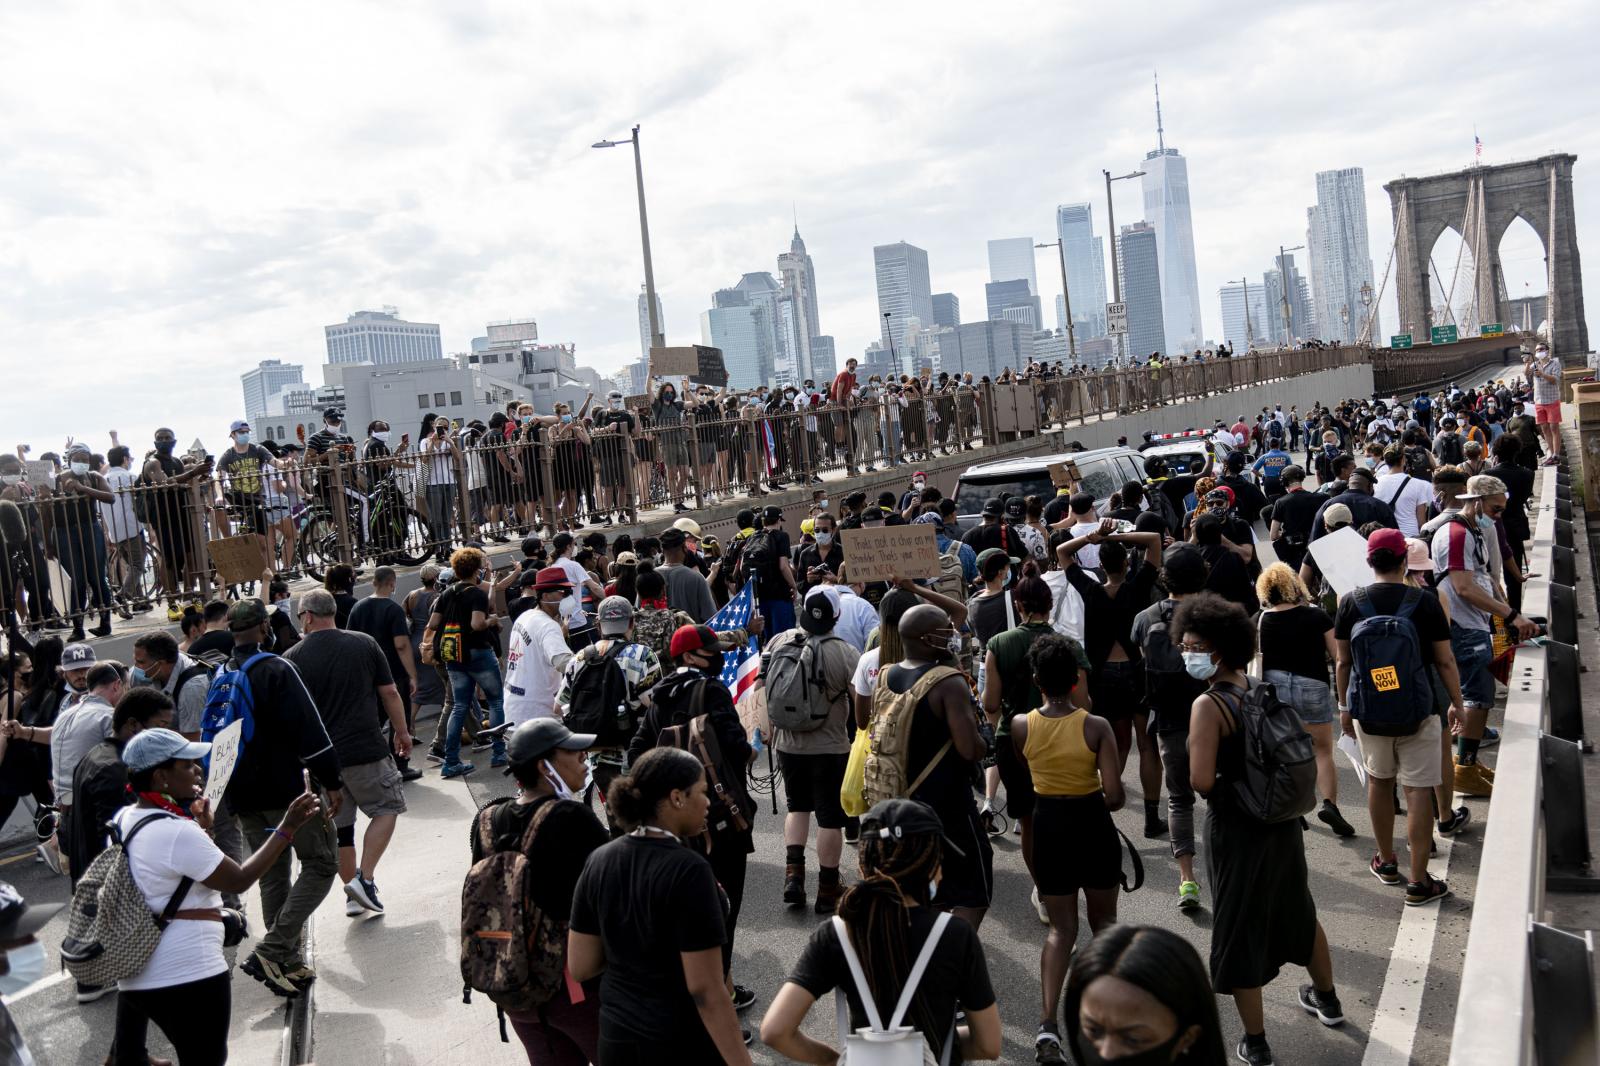 Image from NYC: MidiaNinja - Thousands of protesters marched peacefully in the company...